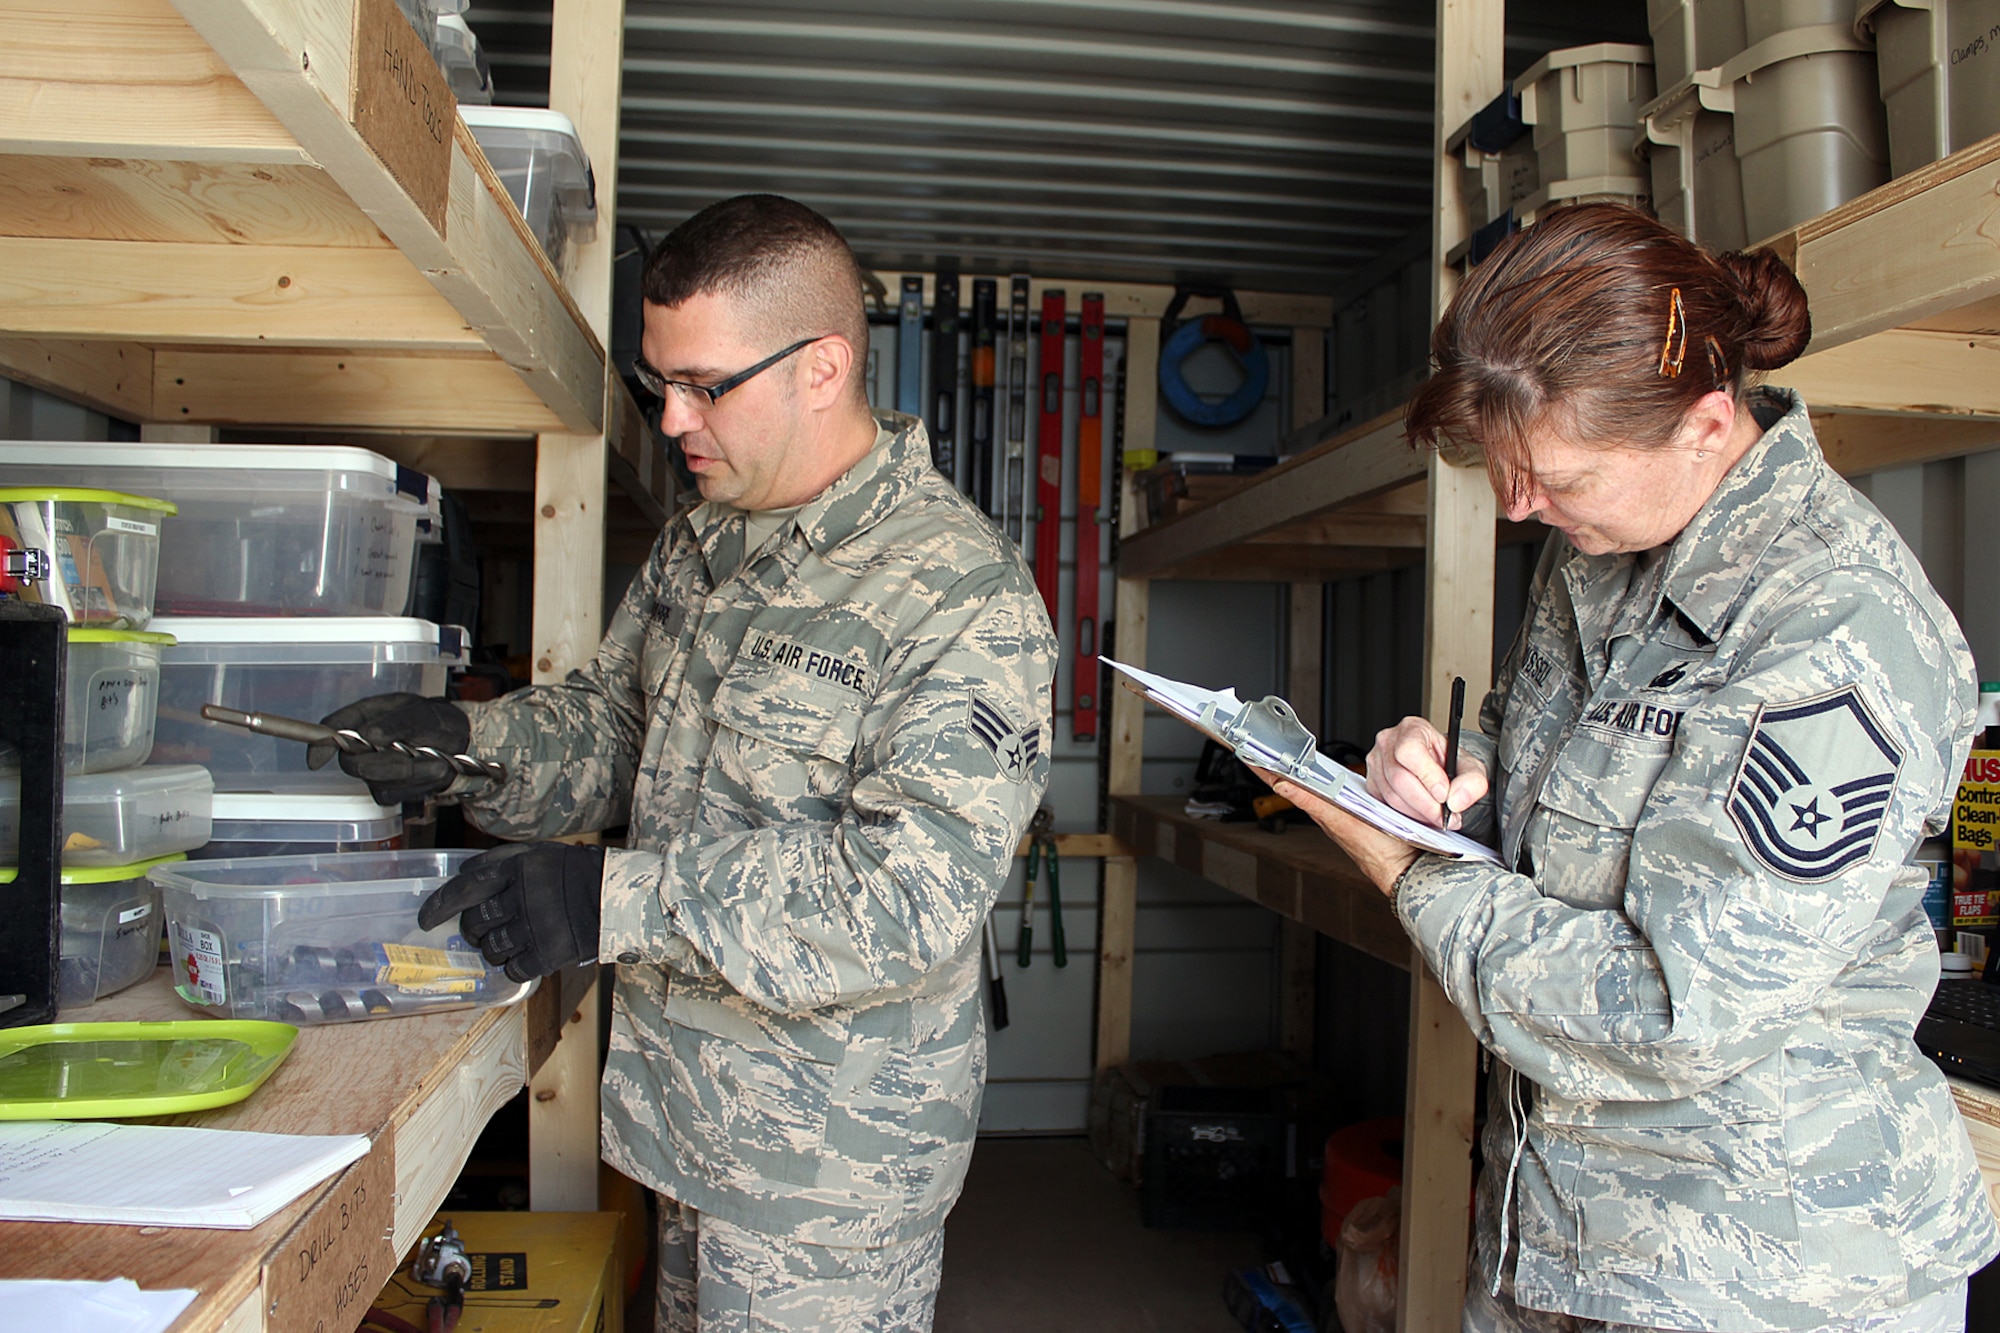 140521-Z-VA676-038 -- Senior Airman Jason Navarre and Master Sgt. Maria Russell conduct an inventory check of tools and equipment at Camp Hinds Boy Scout Camp, Raymond, Maine, May 21, 2014. Navarre and Russell are members of the 127th Civil Engineer Squadron, based at Selfridge Air National Guard Base, Mich. The Airmen, along with Marine Corps Reservists and Army Reservists, are working on various construction projects at the camp during an Innovative Readiness Training mission, which allows military personnel to get training in various tasks and a community organization, in this case the Boy Scouts, to benefit from the work. (U.S. Air National Guard photo by Technical Sgt. Dan Heaton)